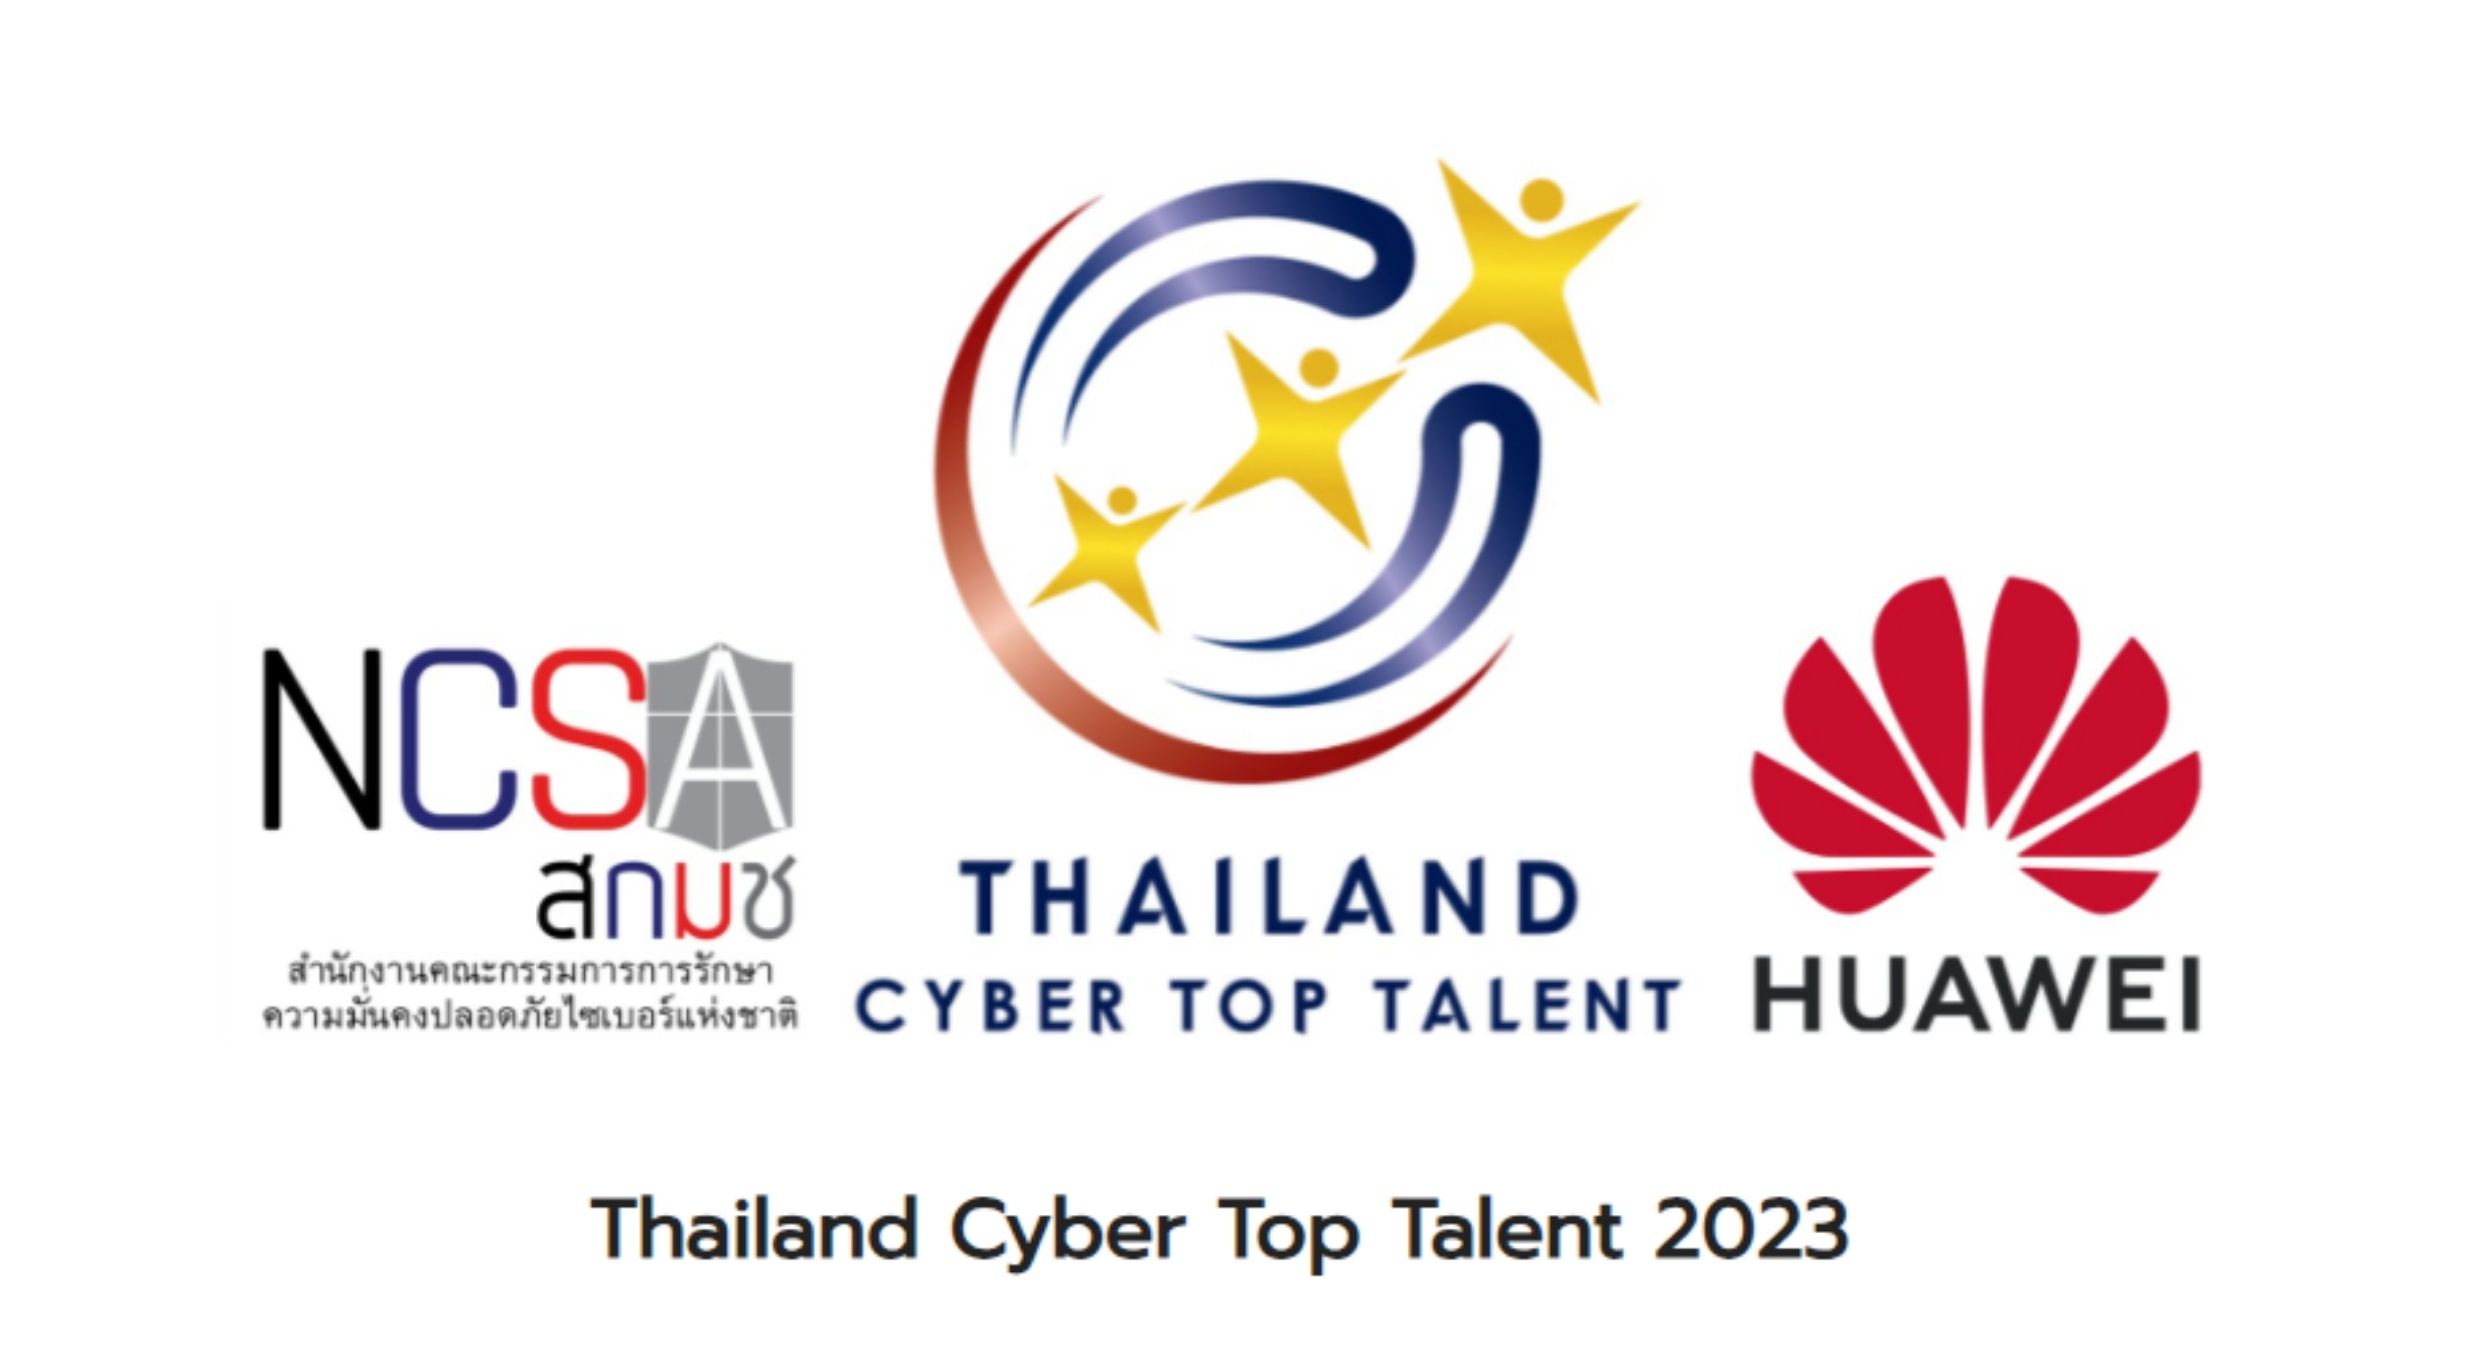 Thailand Cyber Top Talent